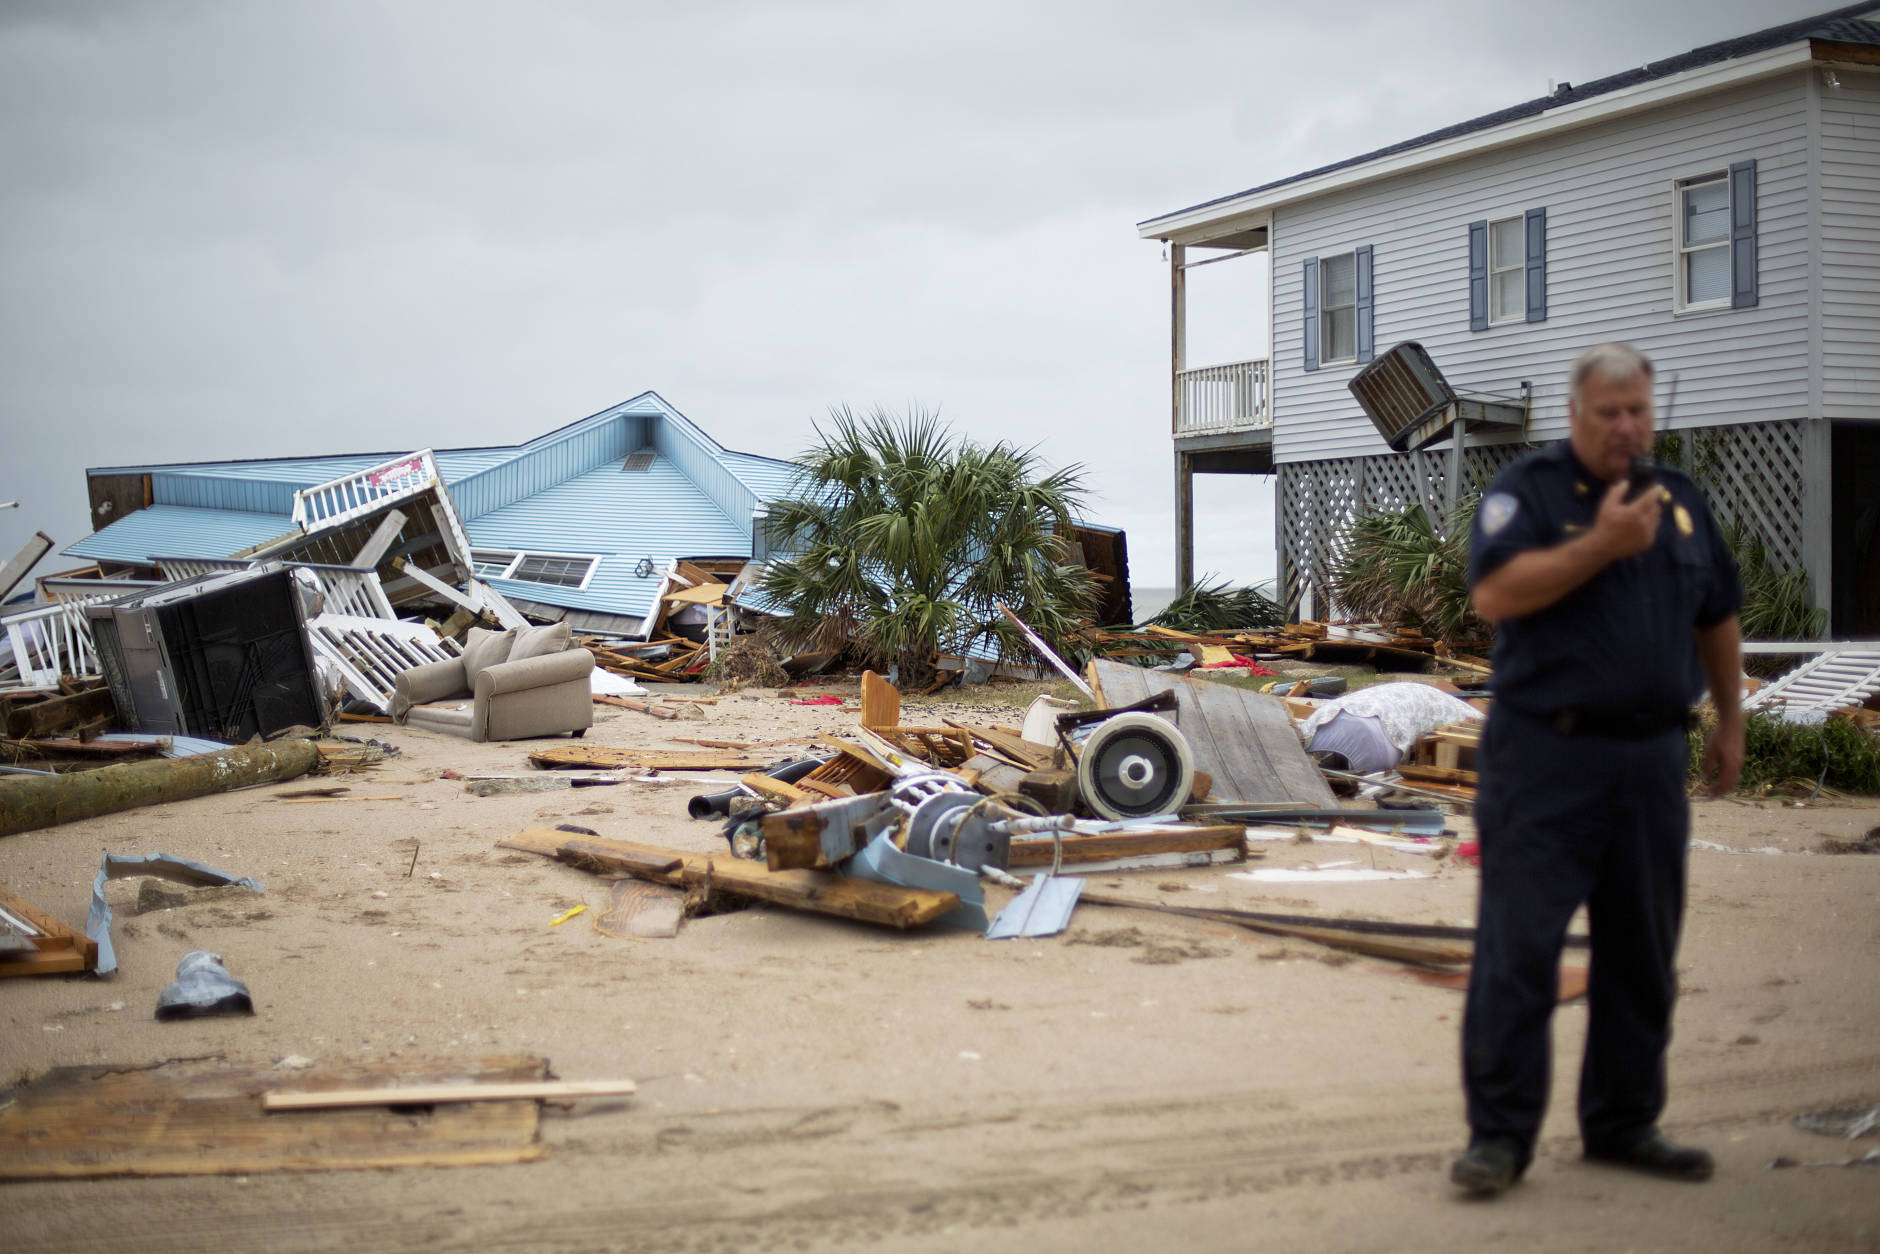 The remnants of a home leveled by Hurricane Matthew sit along the beachfront as Chief of Police George Brothers talks on the radio after Hurricane Matthew hit the tiny beach community of Edisto Beach, S.C., Saturday, Oct. 8, 2016. (AP Photo/David Goldman)